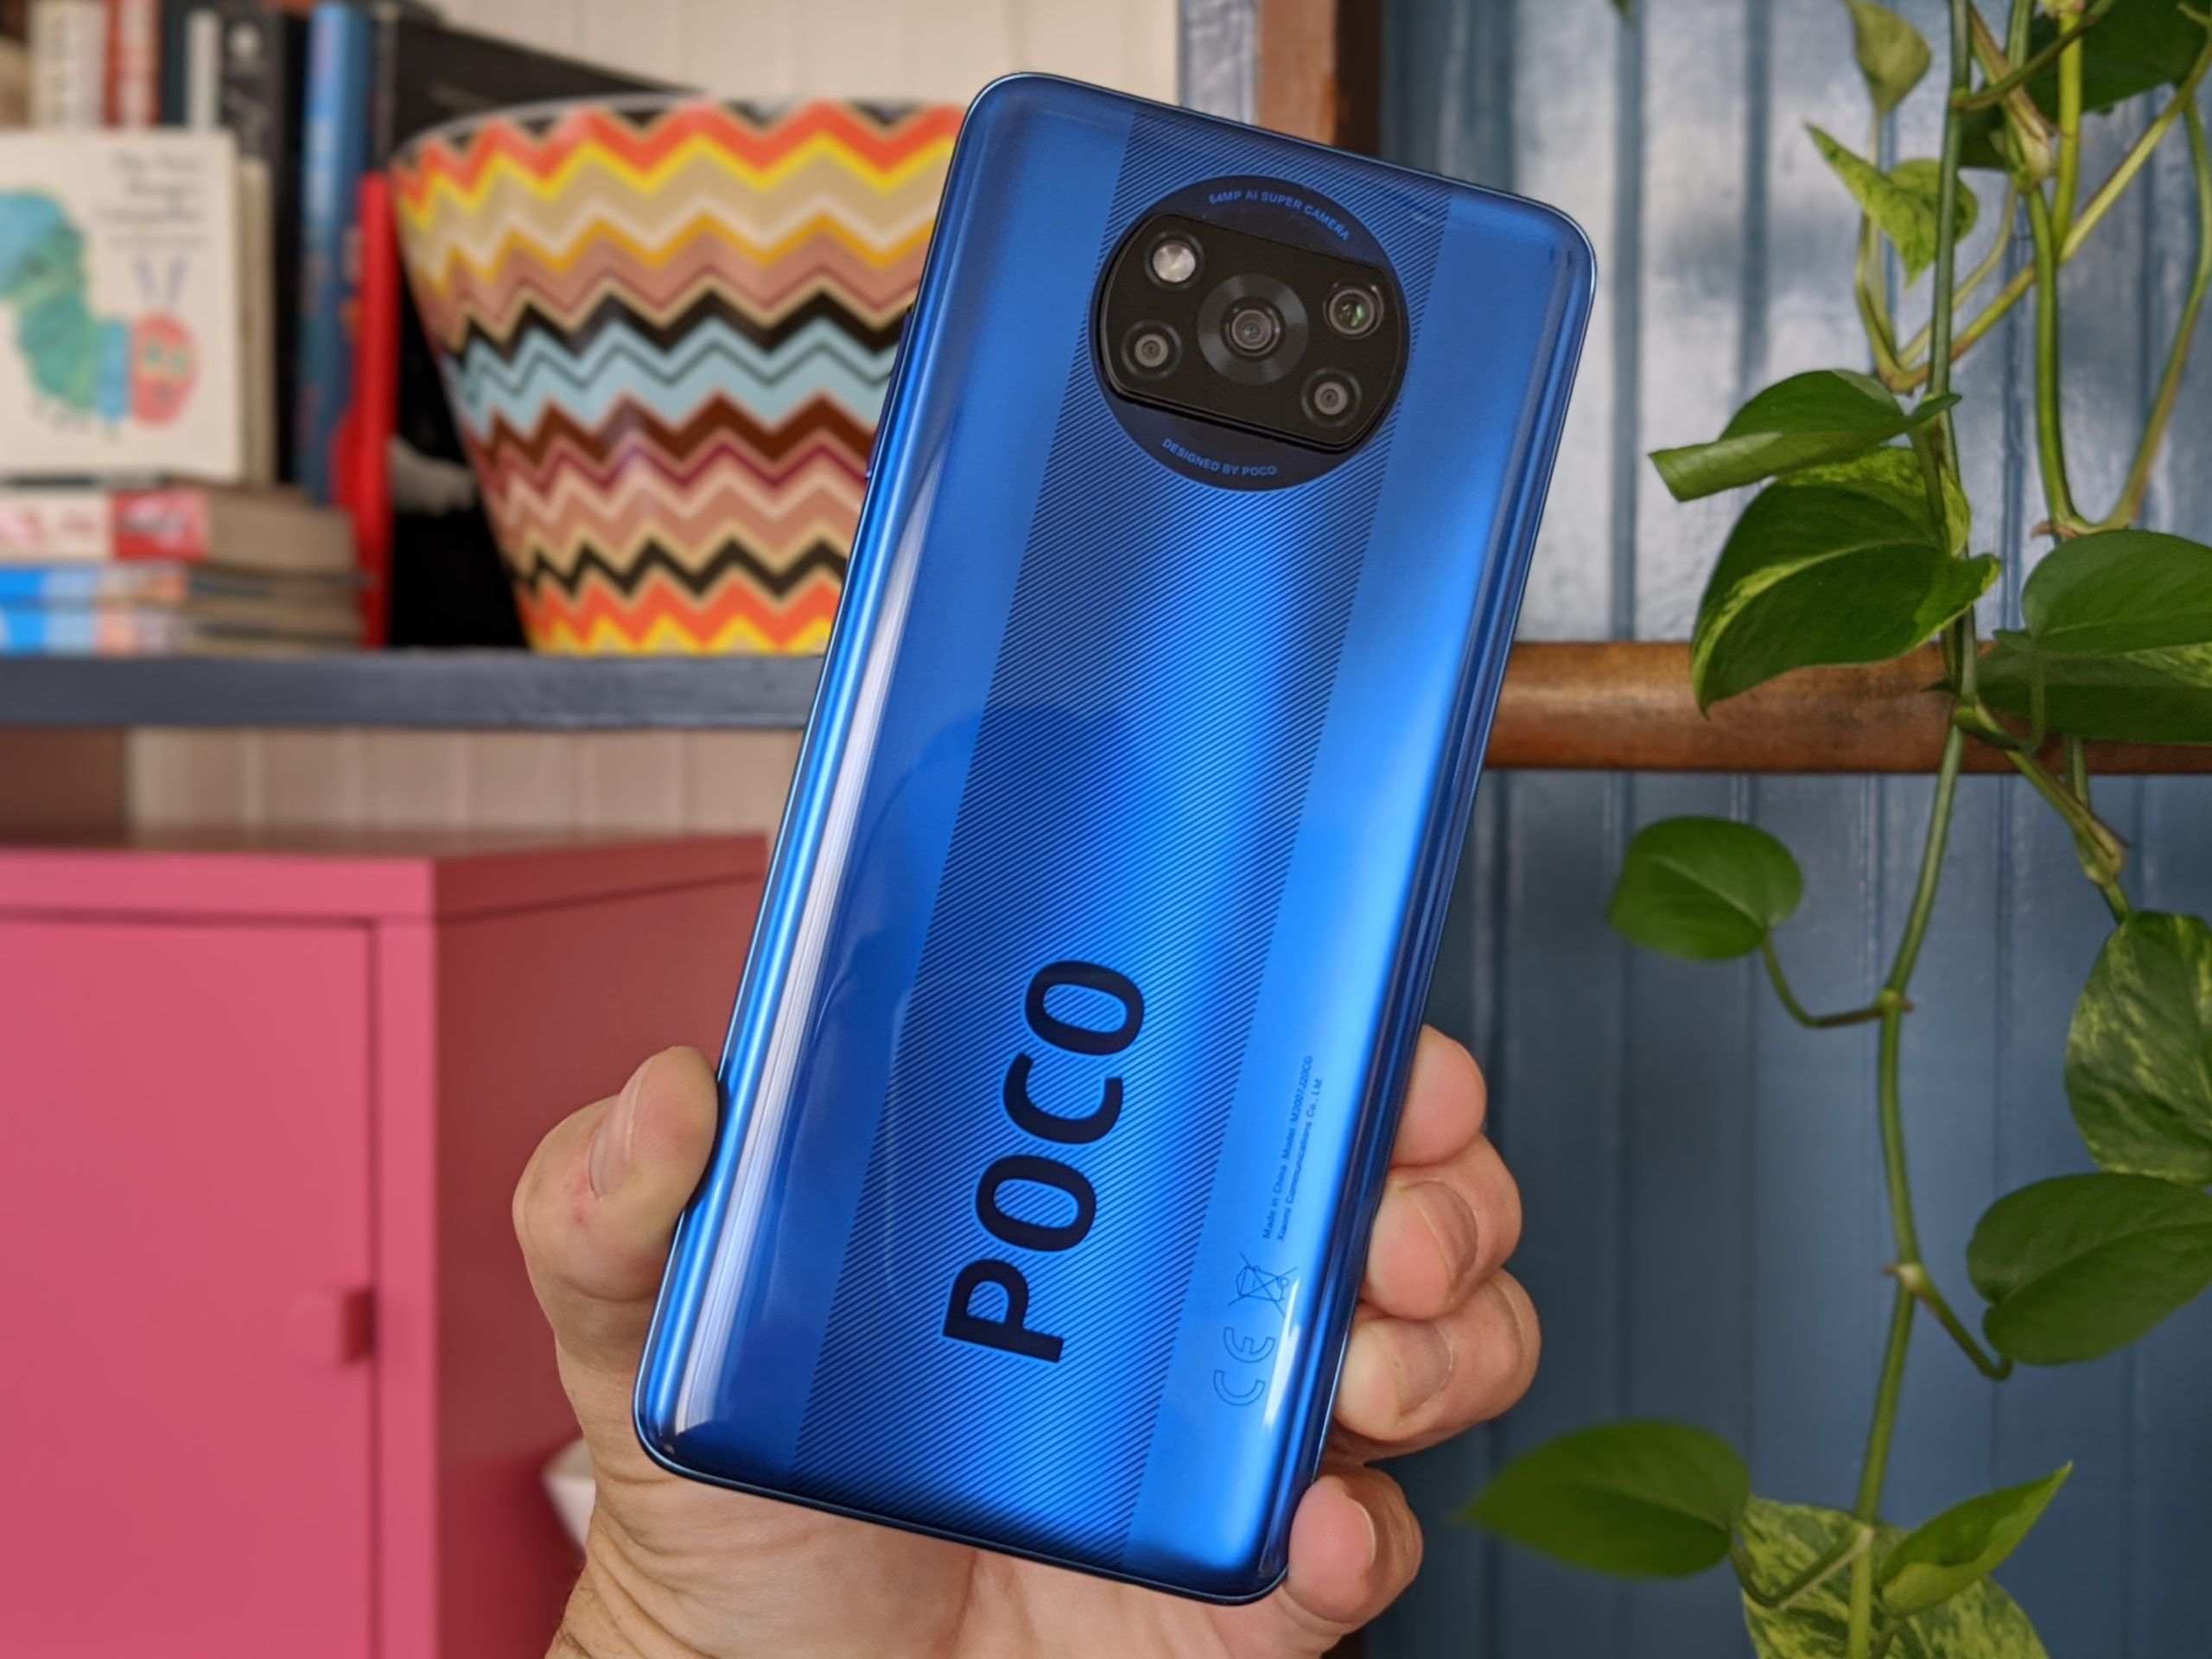 Xiaomi POCO X3 review: The right compromises - Android Authority